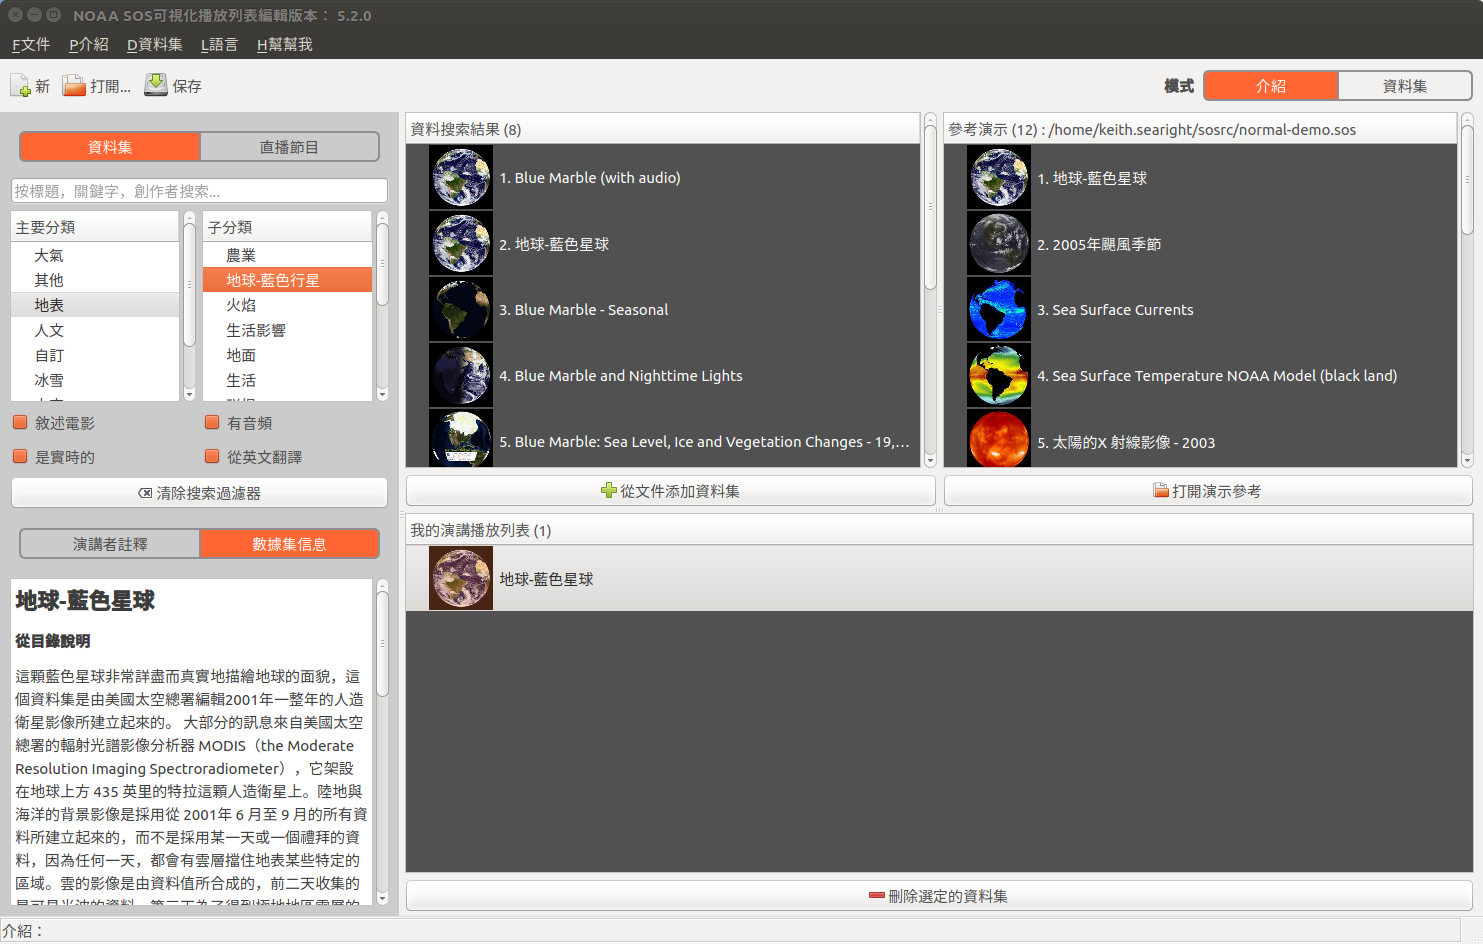 Screenshot of the Visual Playlist Editor. All of the text in the interface is Traditional Chinese